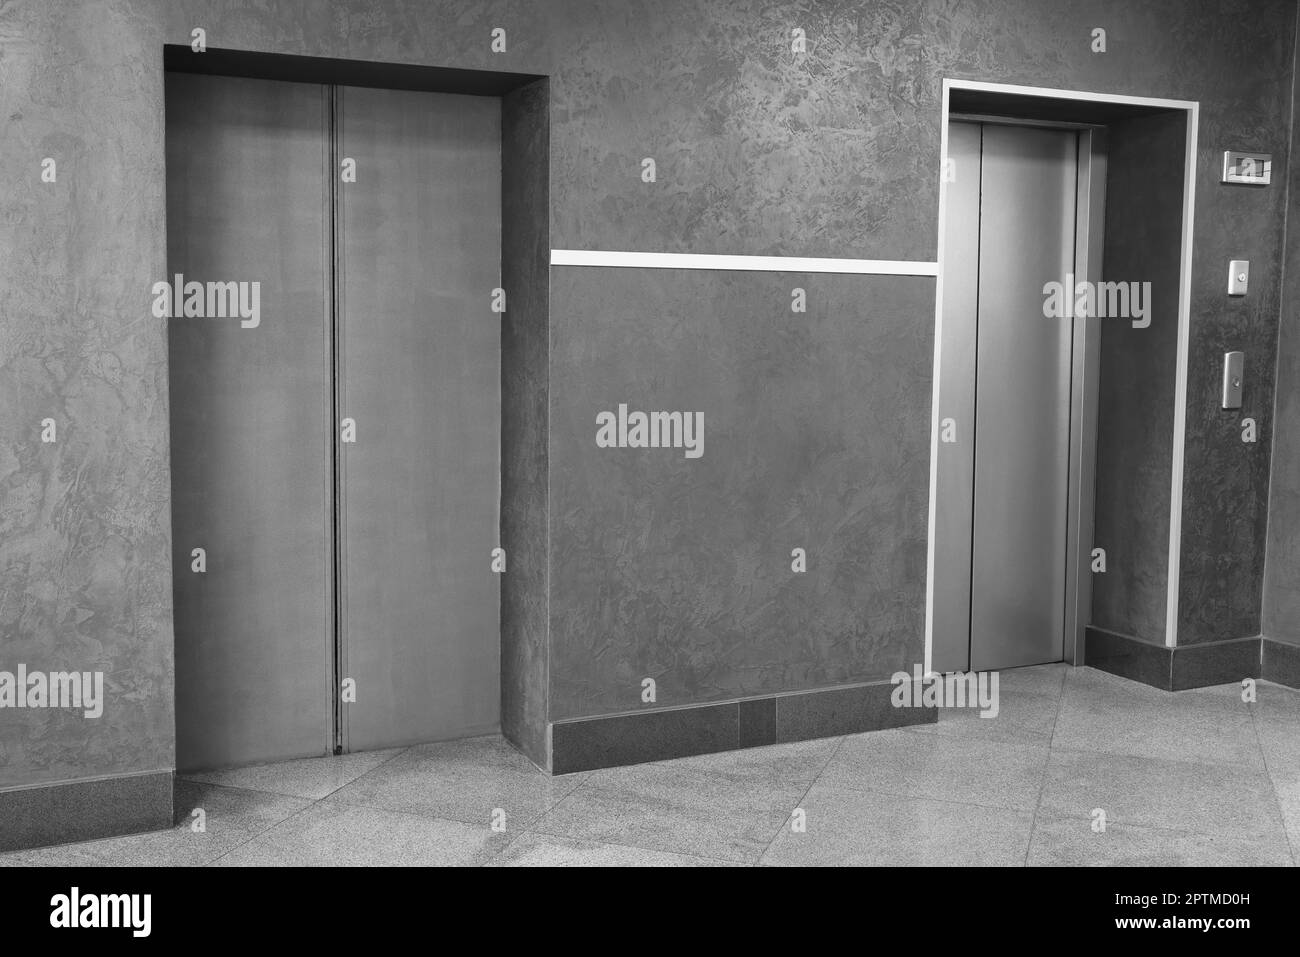 Closed stylish elevator doors in clean hall Stock Photo